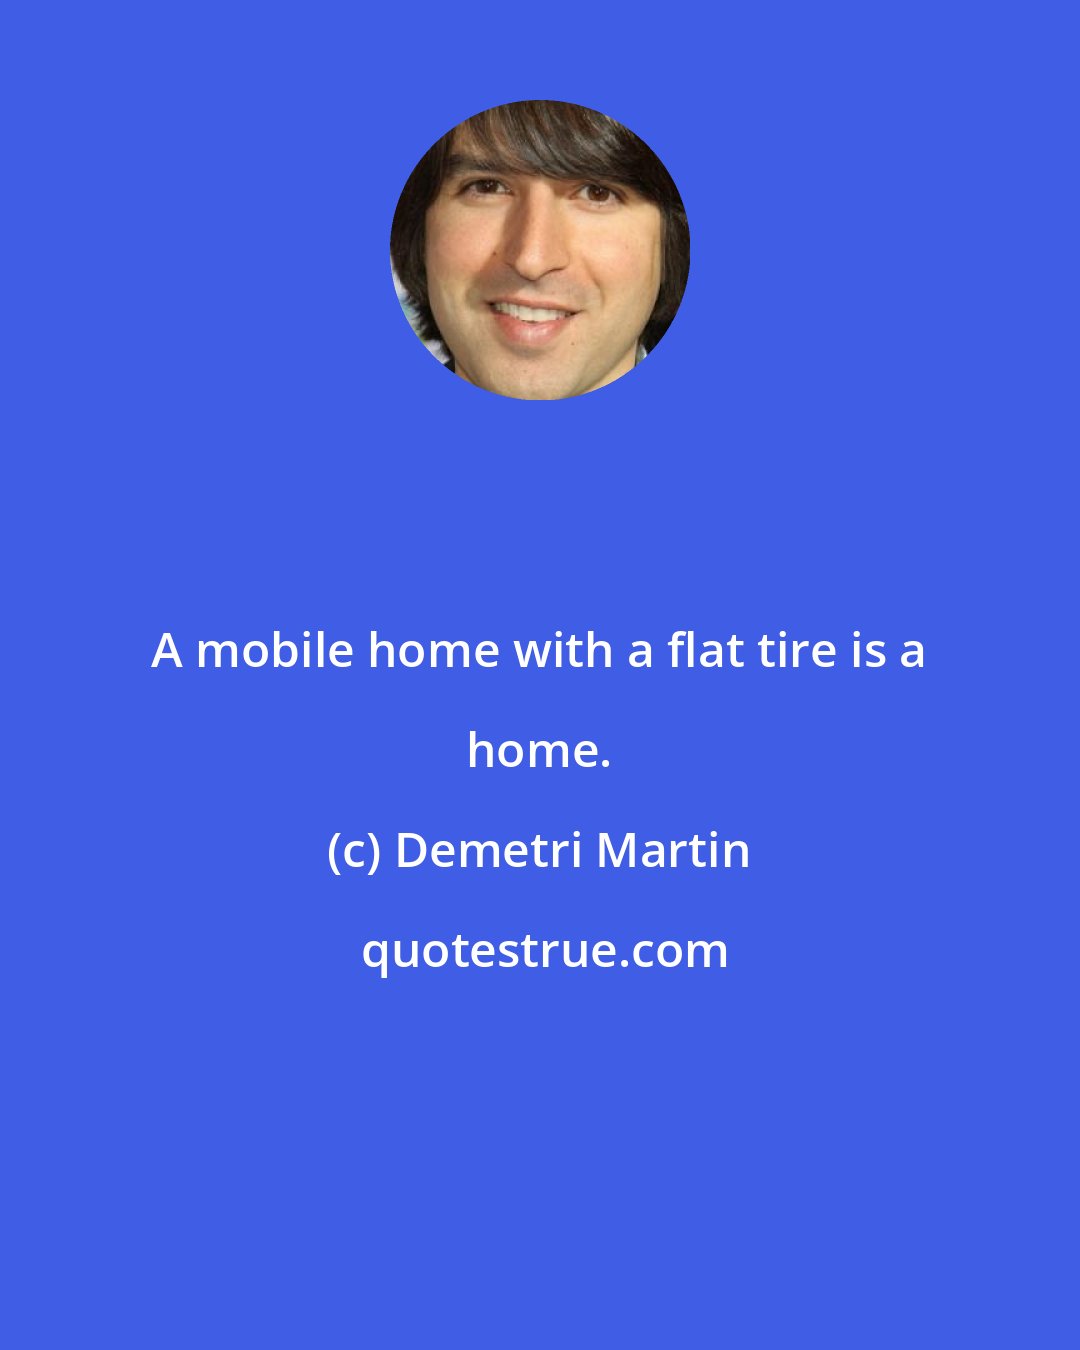 Demetri Martin: A mobile home with a flat tire is a home.